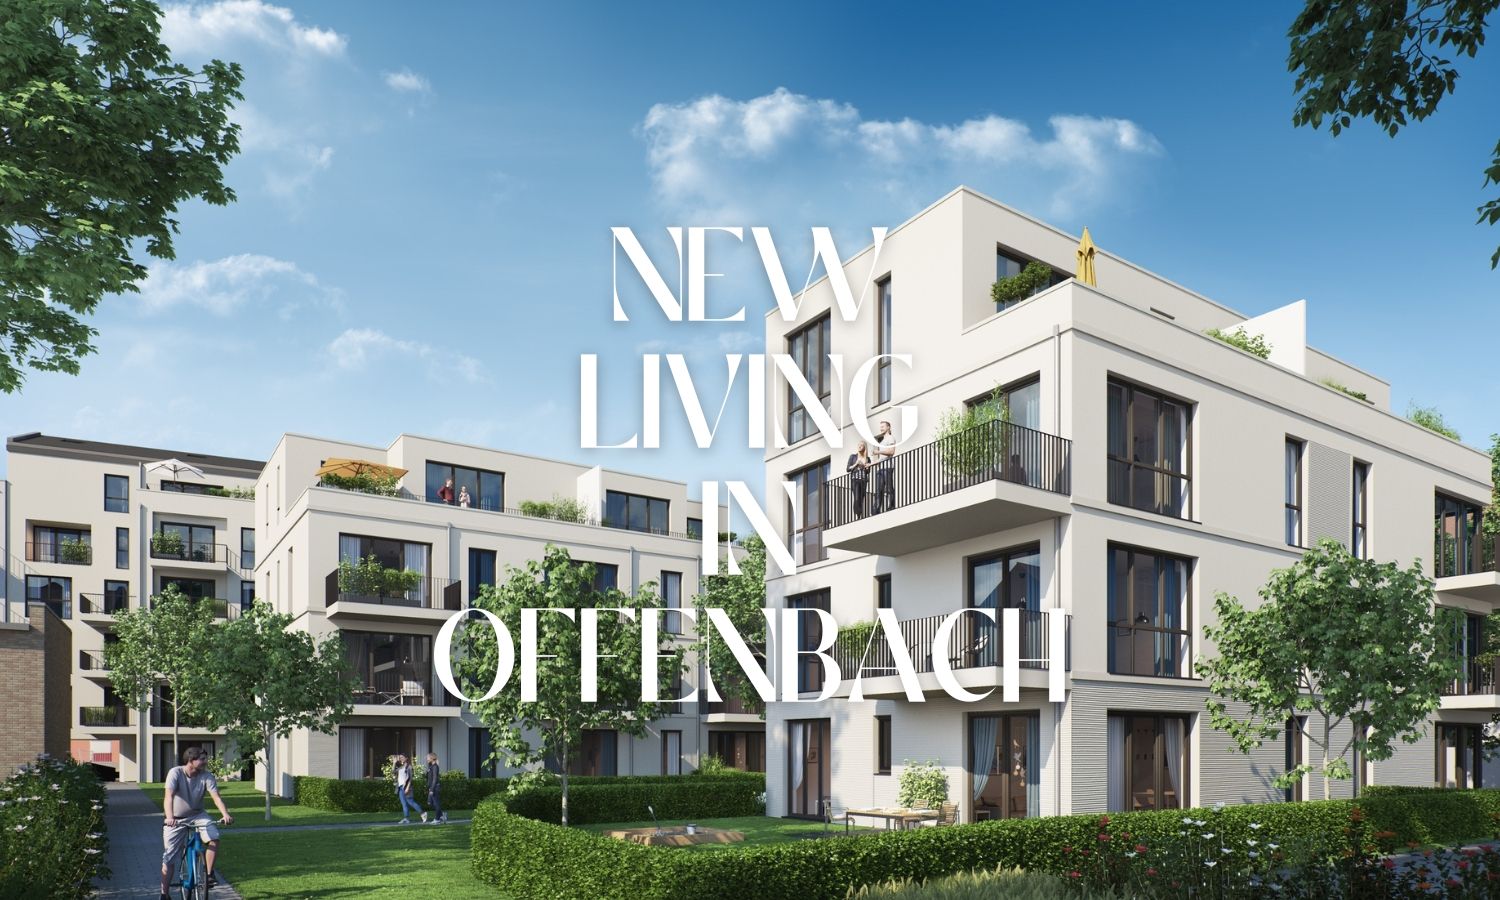 VERO - NEW LIVING IN OFFENBACH